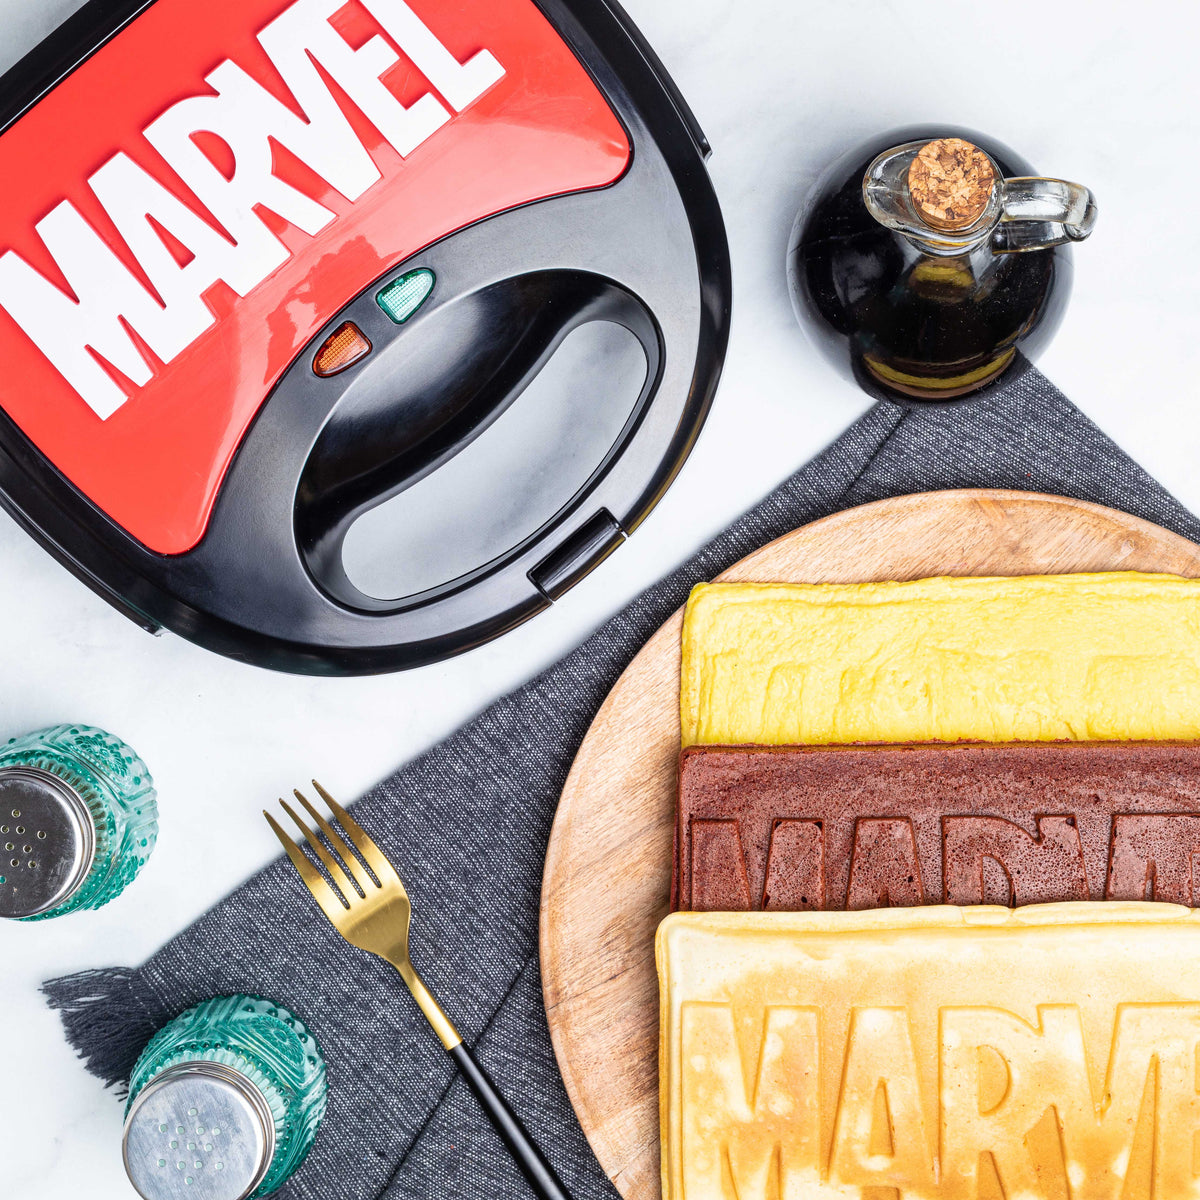 Marvel&#39;s Eat the Universe Logo 3-in-1 Kitchen Appliance